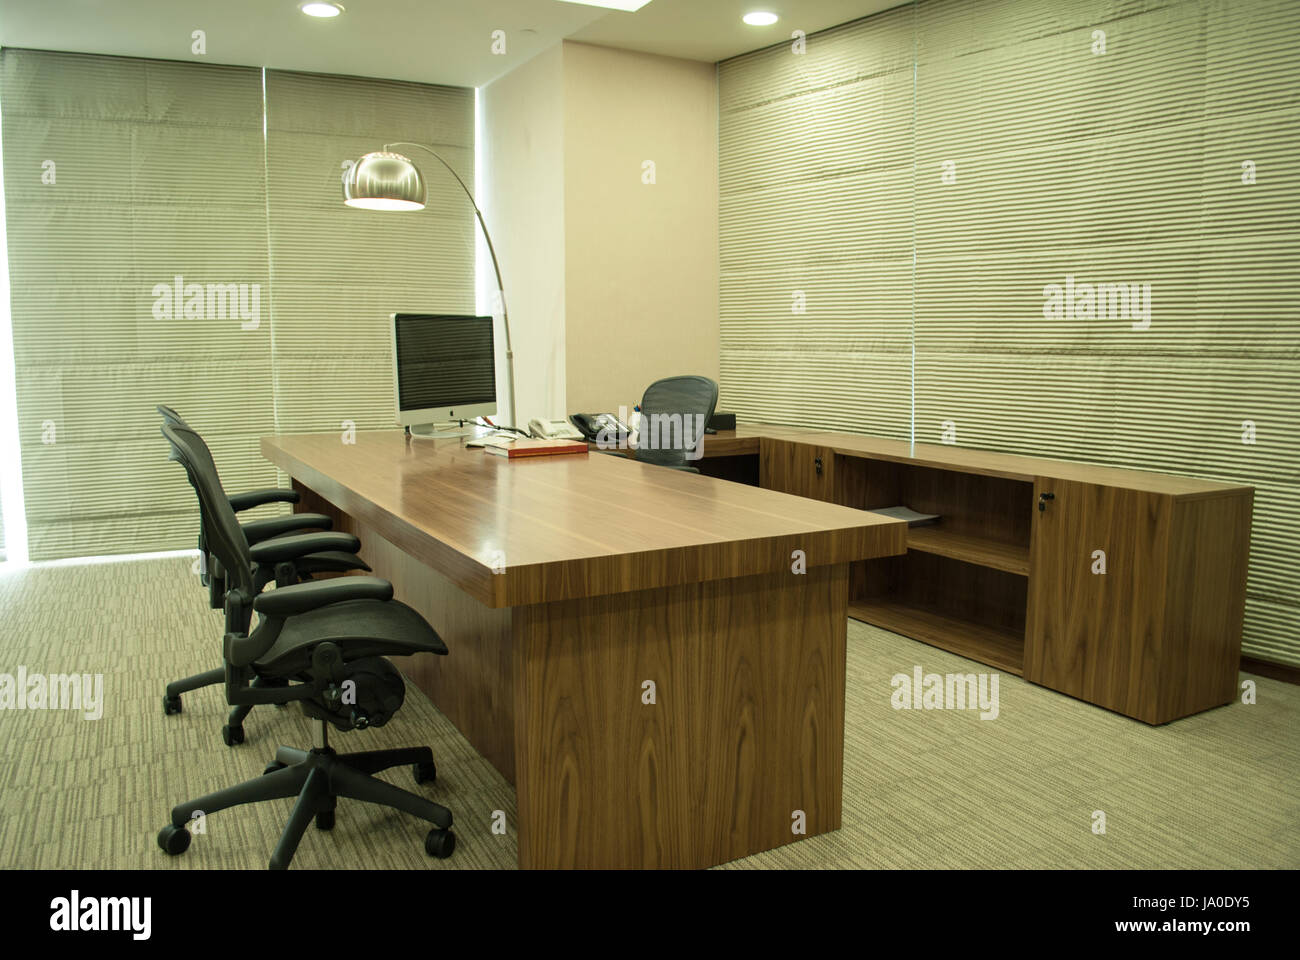 MD cabin 3D render office interior competitions with white and wallpaper  Stock Photo Picture And Low Budget Royalty Free Image Pic ESY059286968   agefotostock